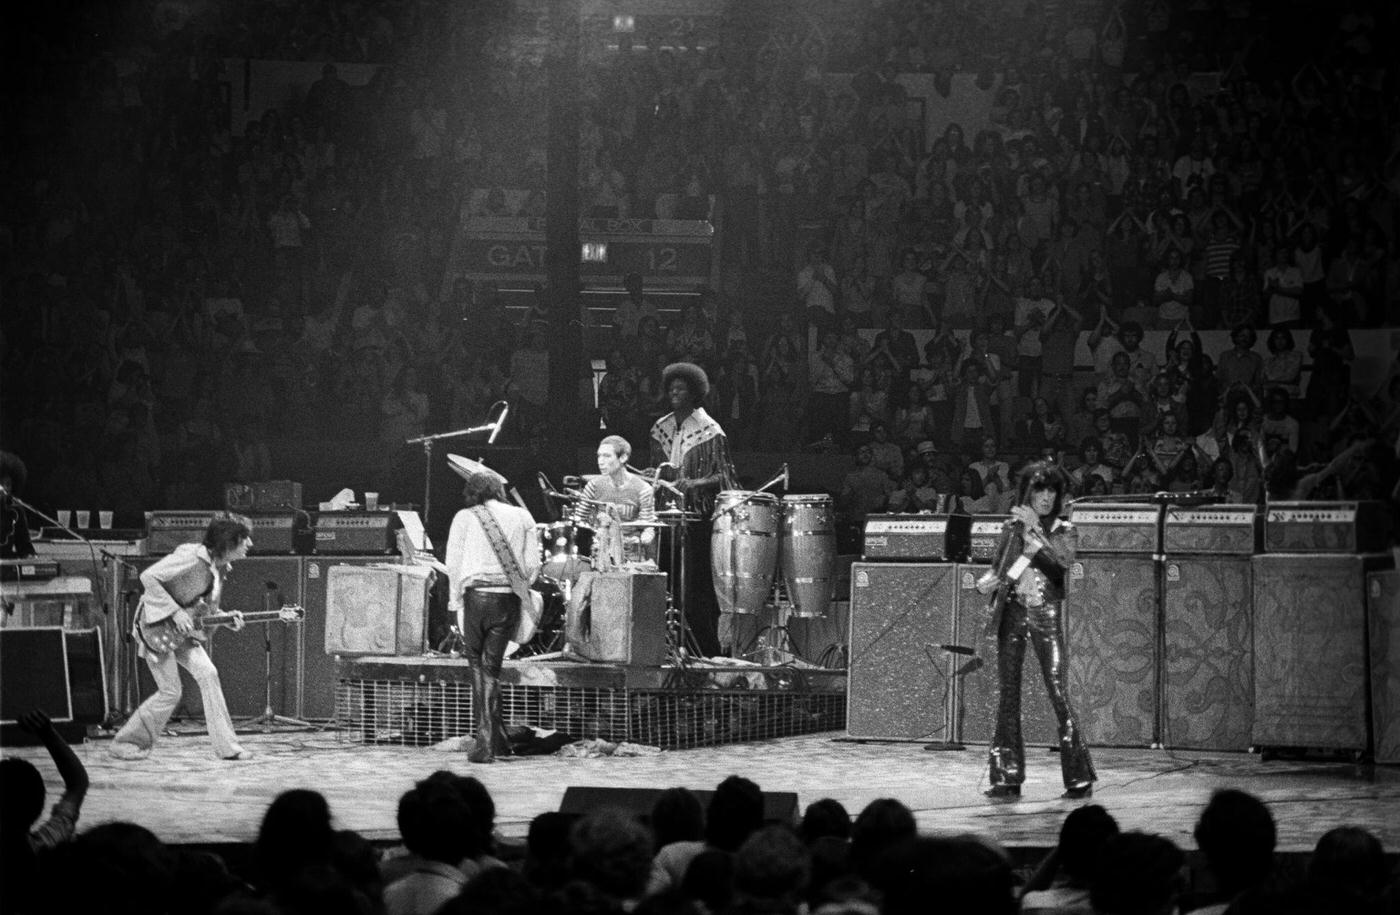 Ronnie Wood, Keith Richards, Charlie Watts, Bill Wyman, Mick Jagger, Ollie Brown, and Billy Preston perform at Madison Square Garden during the band's "Tour of America '75" on June 25, 1975, in New York, New York.